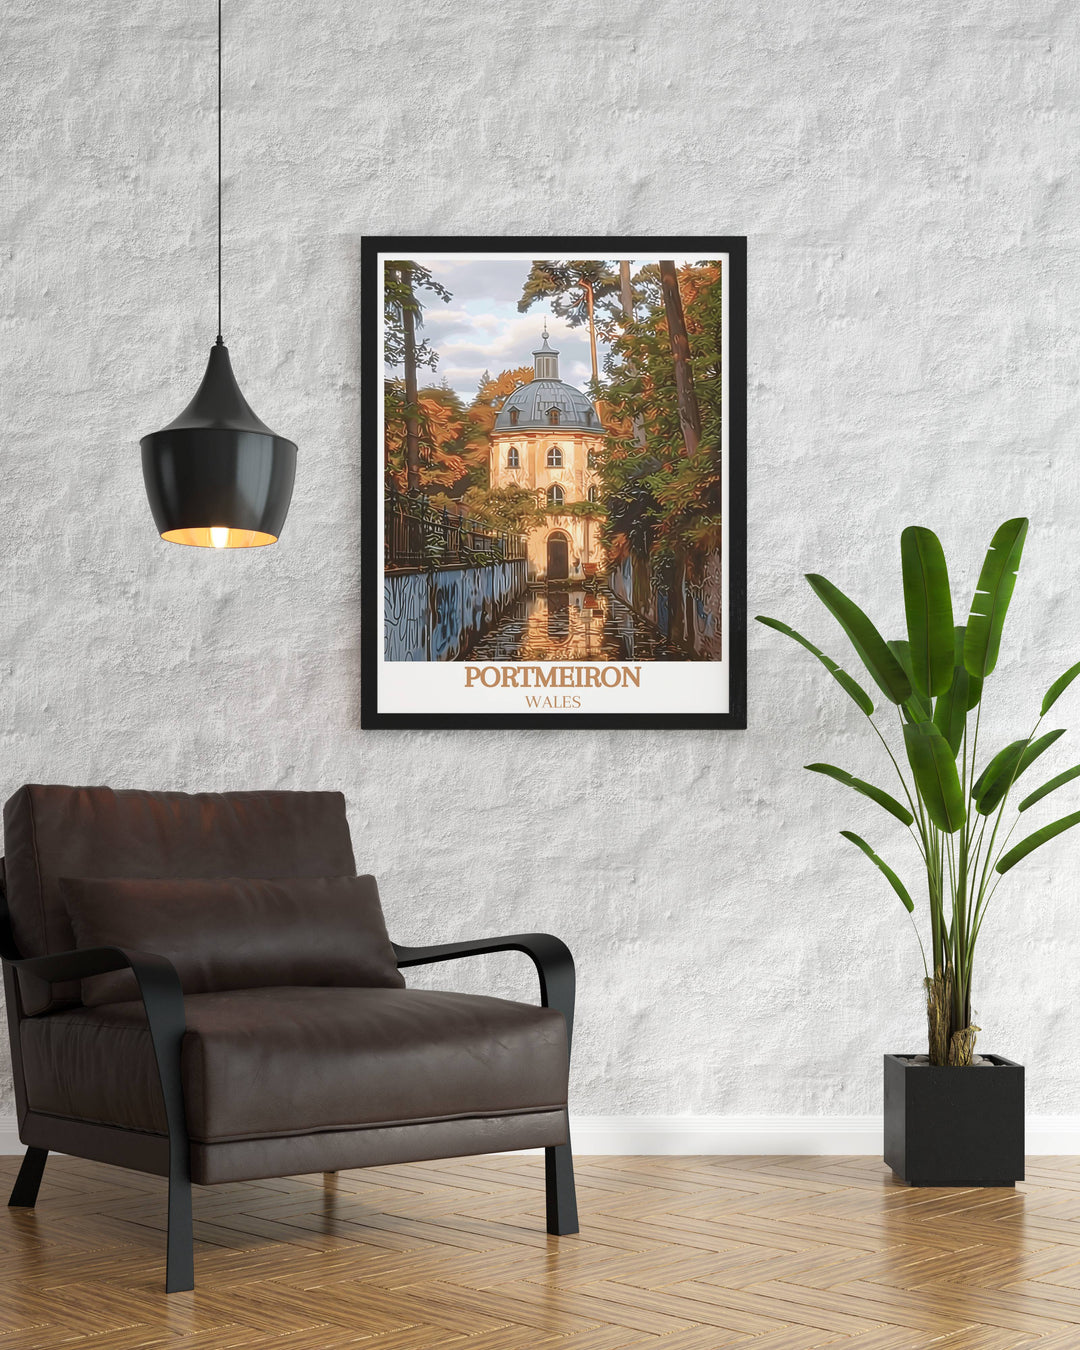 Portmeirion Modern Wall Decor brings the beauty of this Welsh village into your home, capturing its colorful architecture and lush surroundings. A wonderful gift for Wales lovers and home decor enthusiasts.